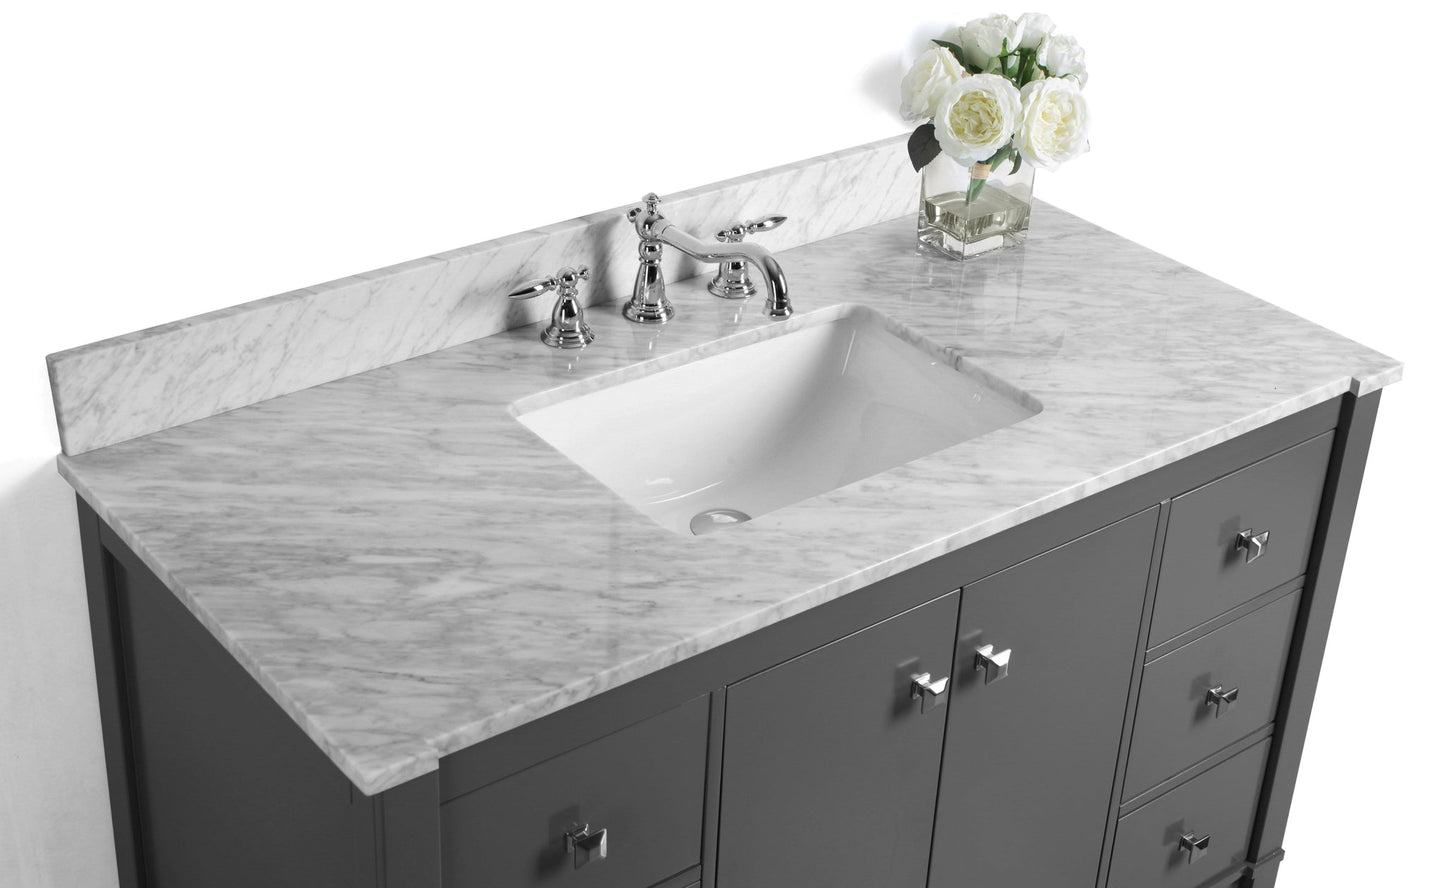 Kayleigh 48 in. Bath Vanity Set in Sapphire Gray with Carrara White Marble Countertop